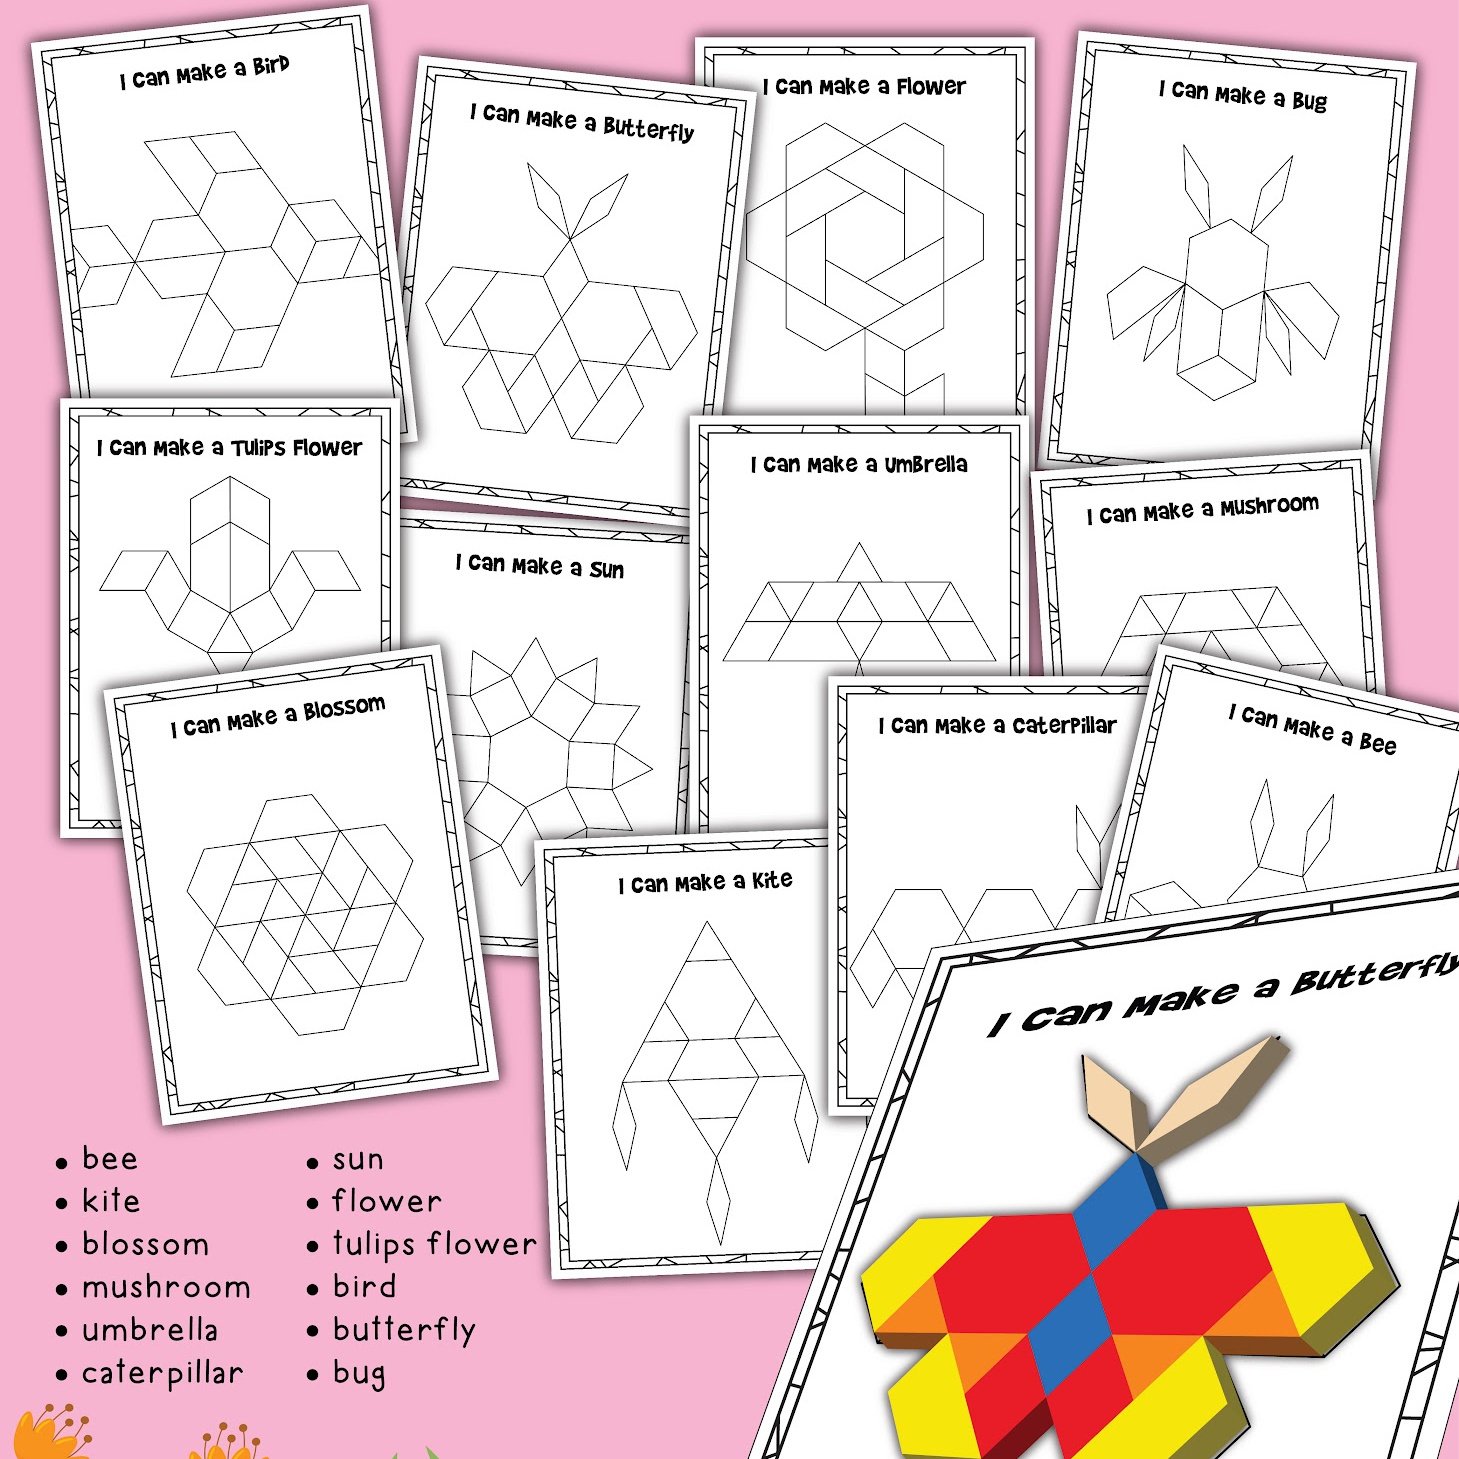 How to begin working with pattern blocks - The basics of pattern